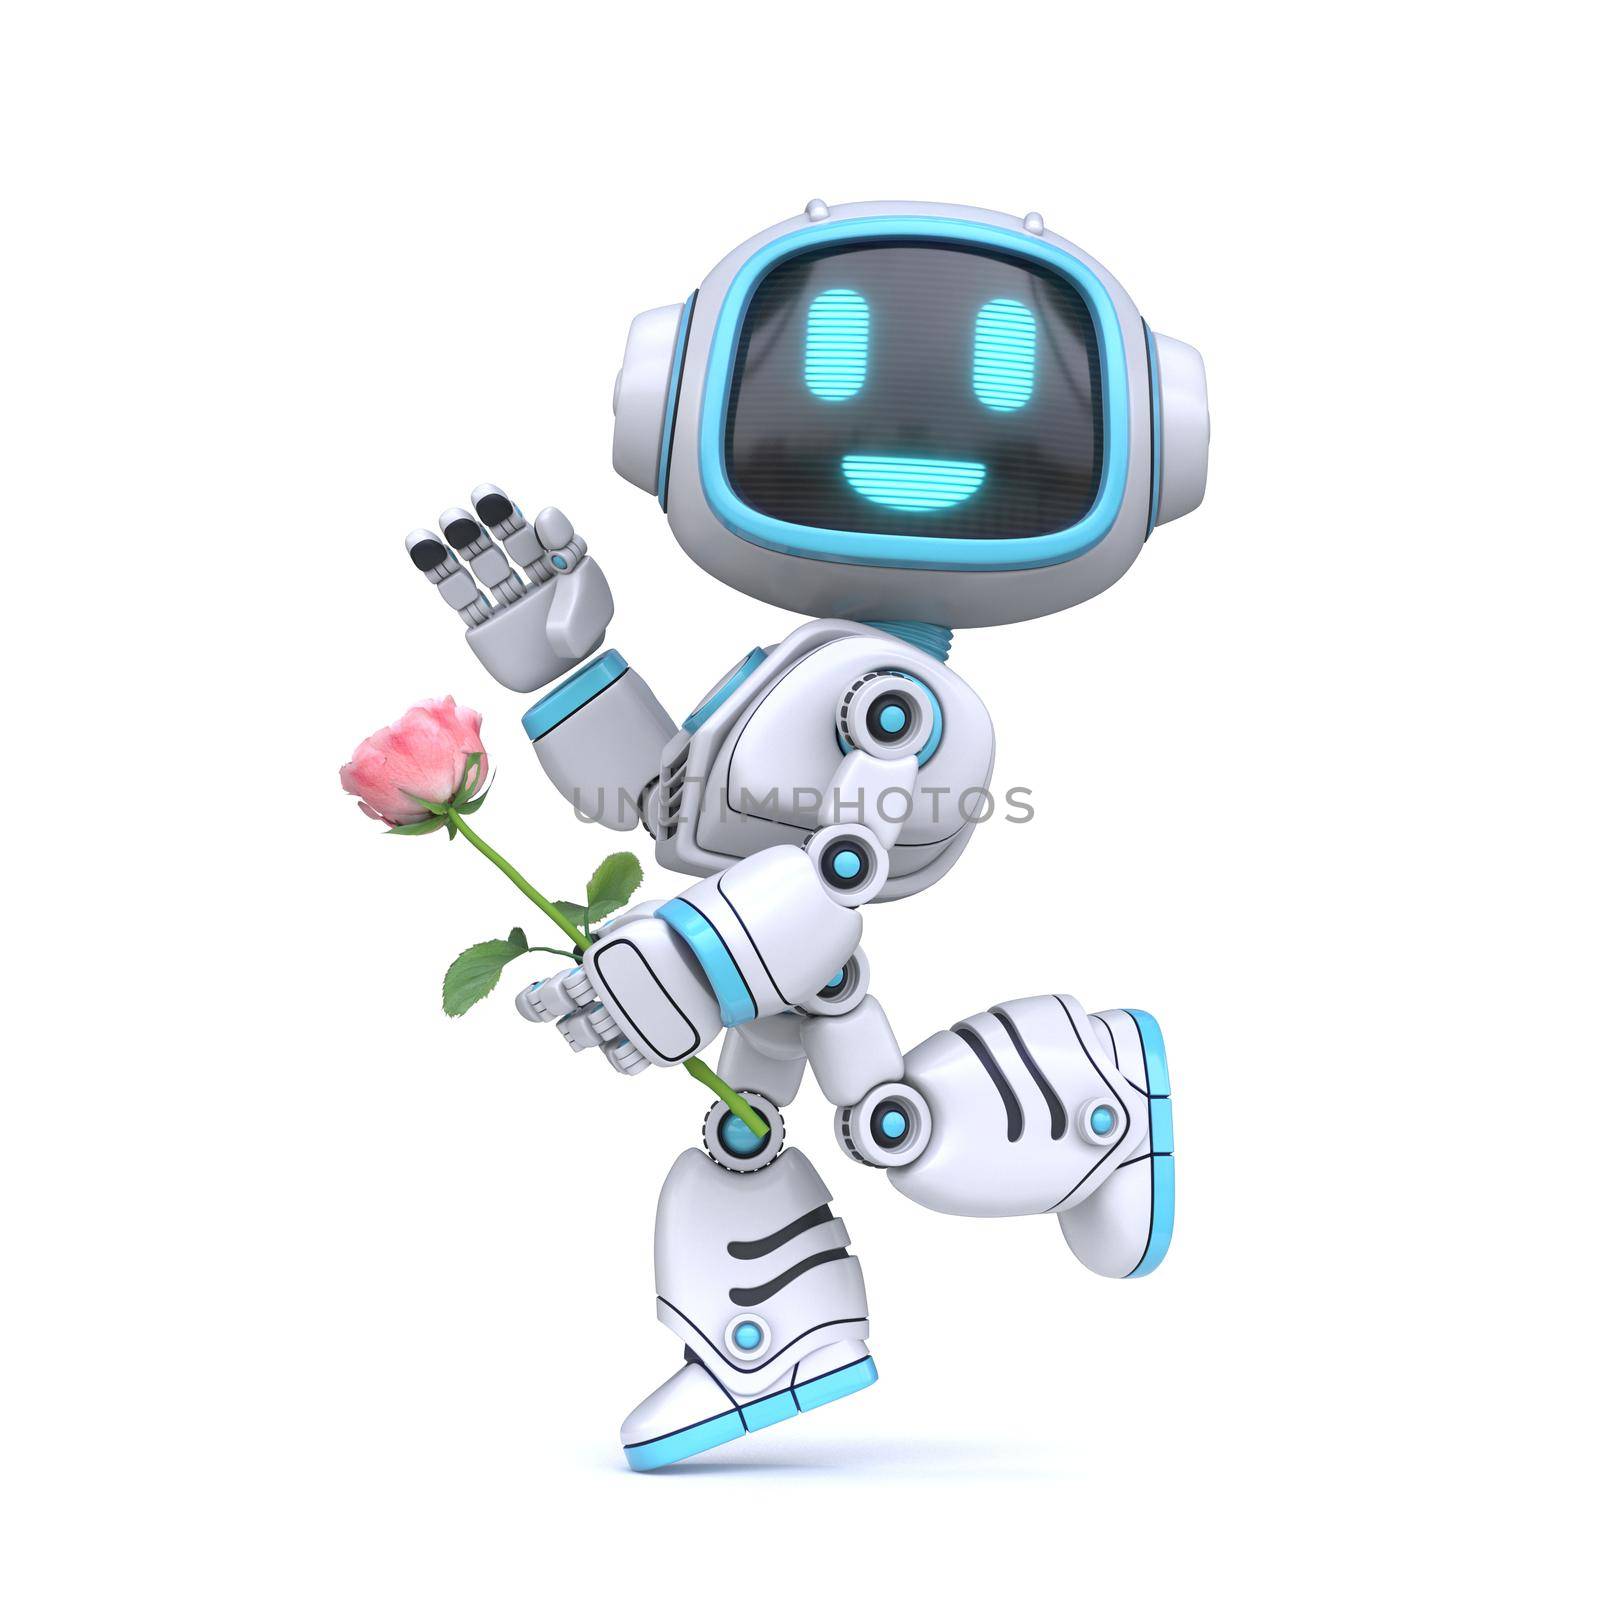 Cute blue robot in love hold rose 3D rendering illustration isolated on white background